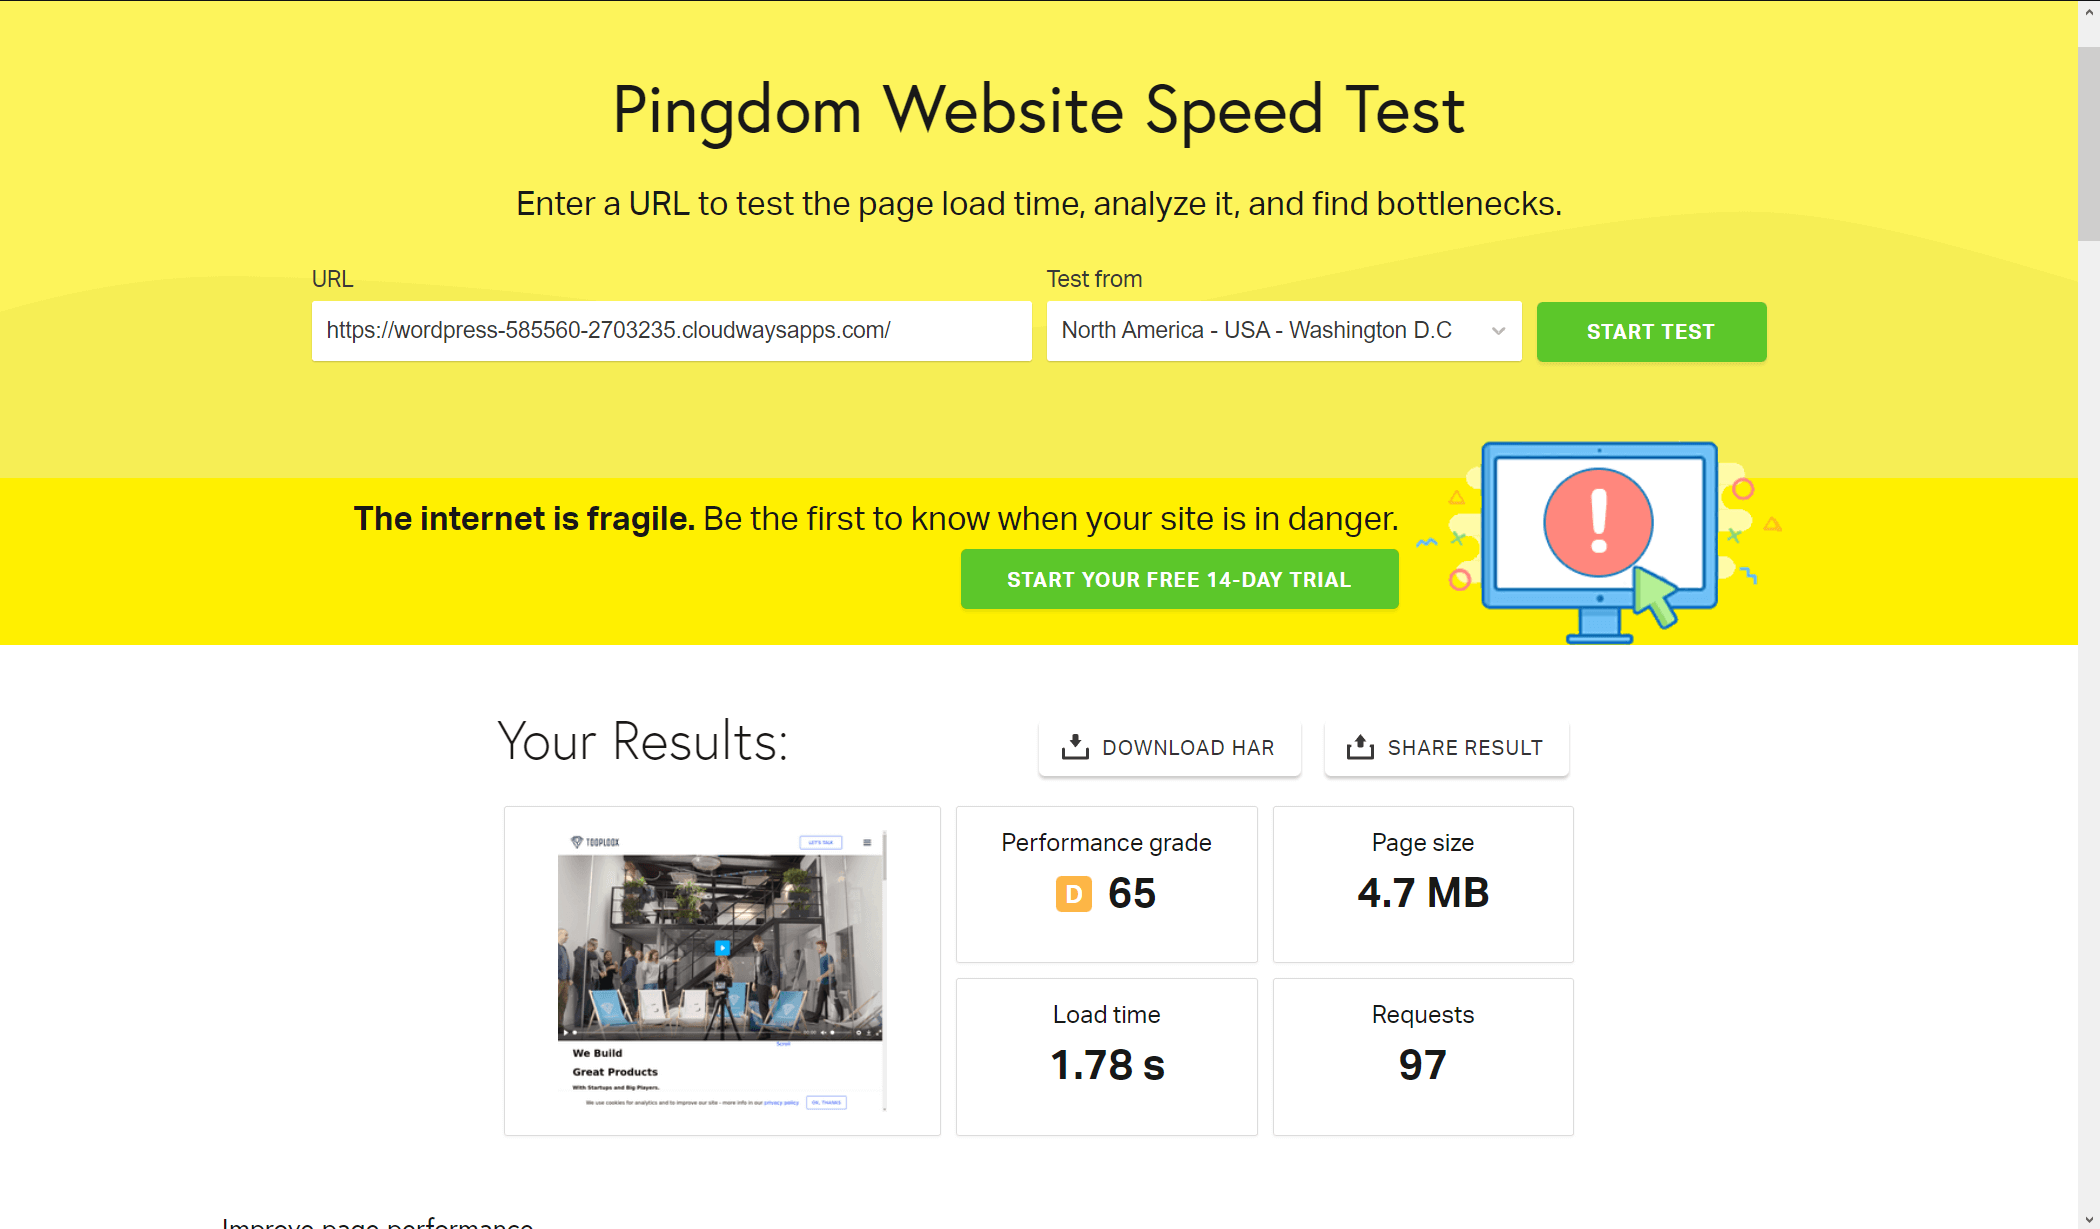 Tooploox - Pingdom Results - old website